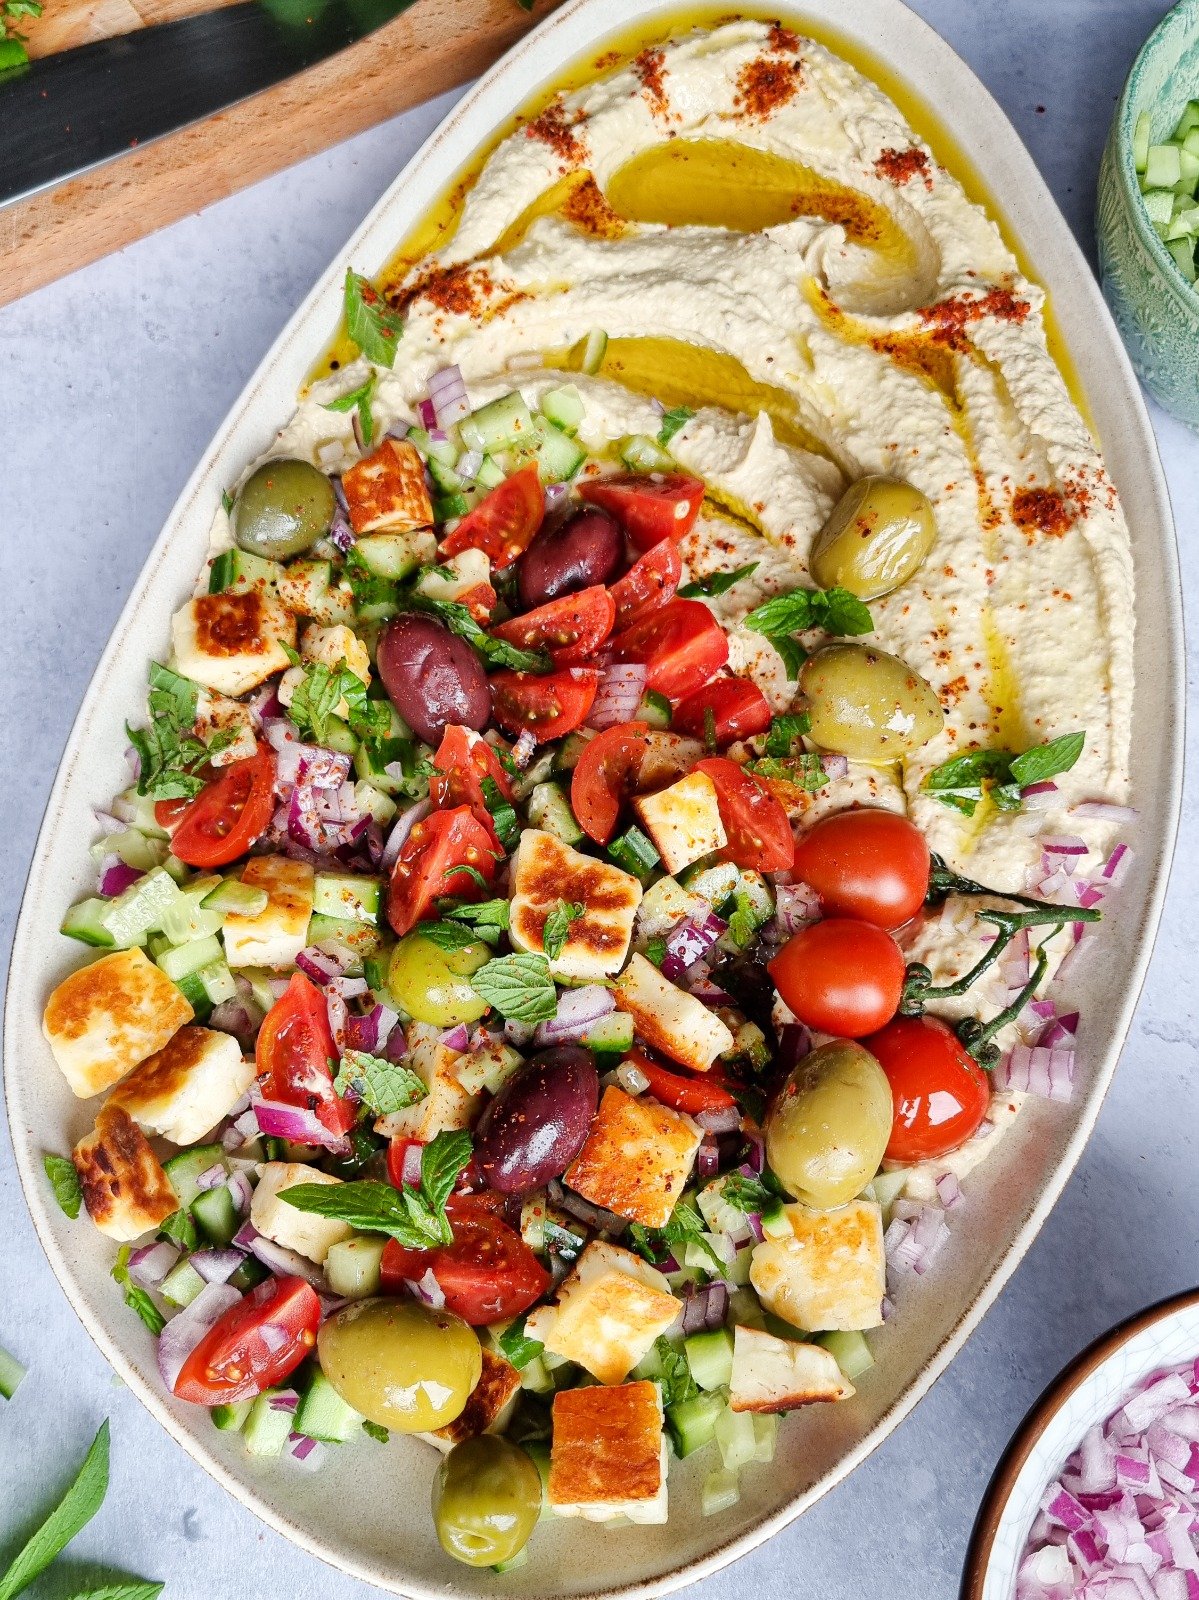 A dish of hummus topped with veggies and grilled halloumi